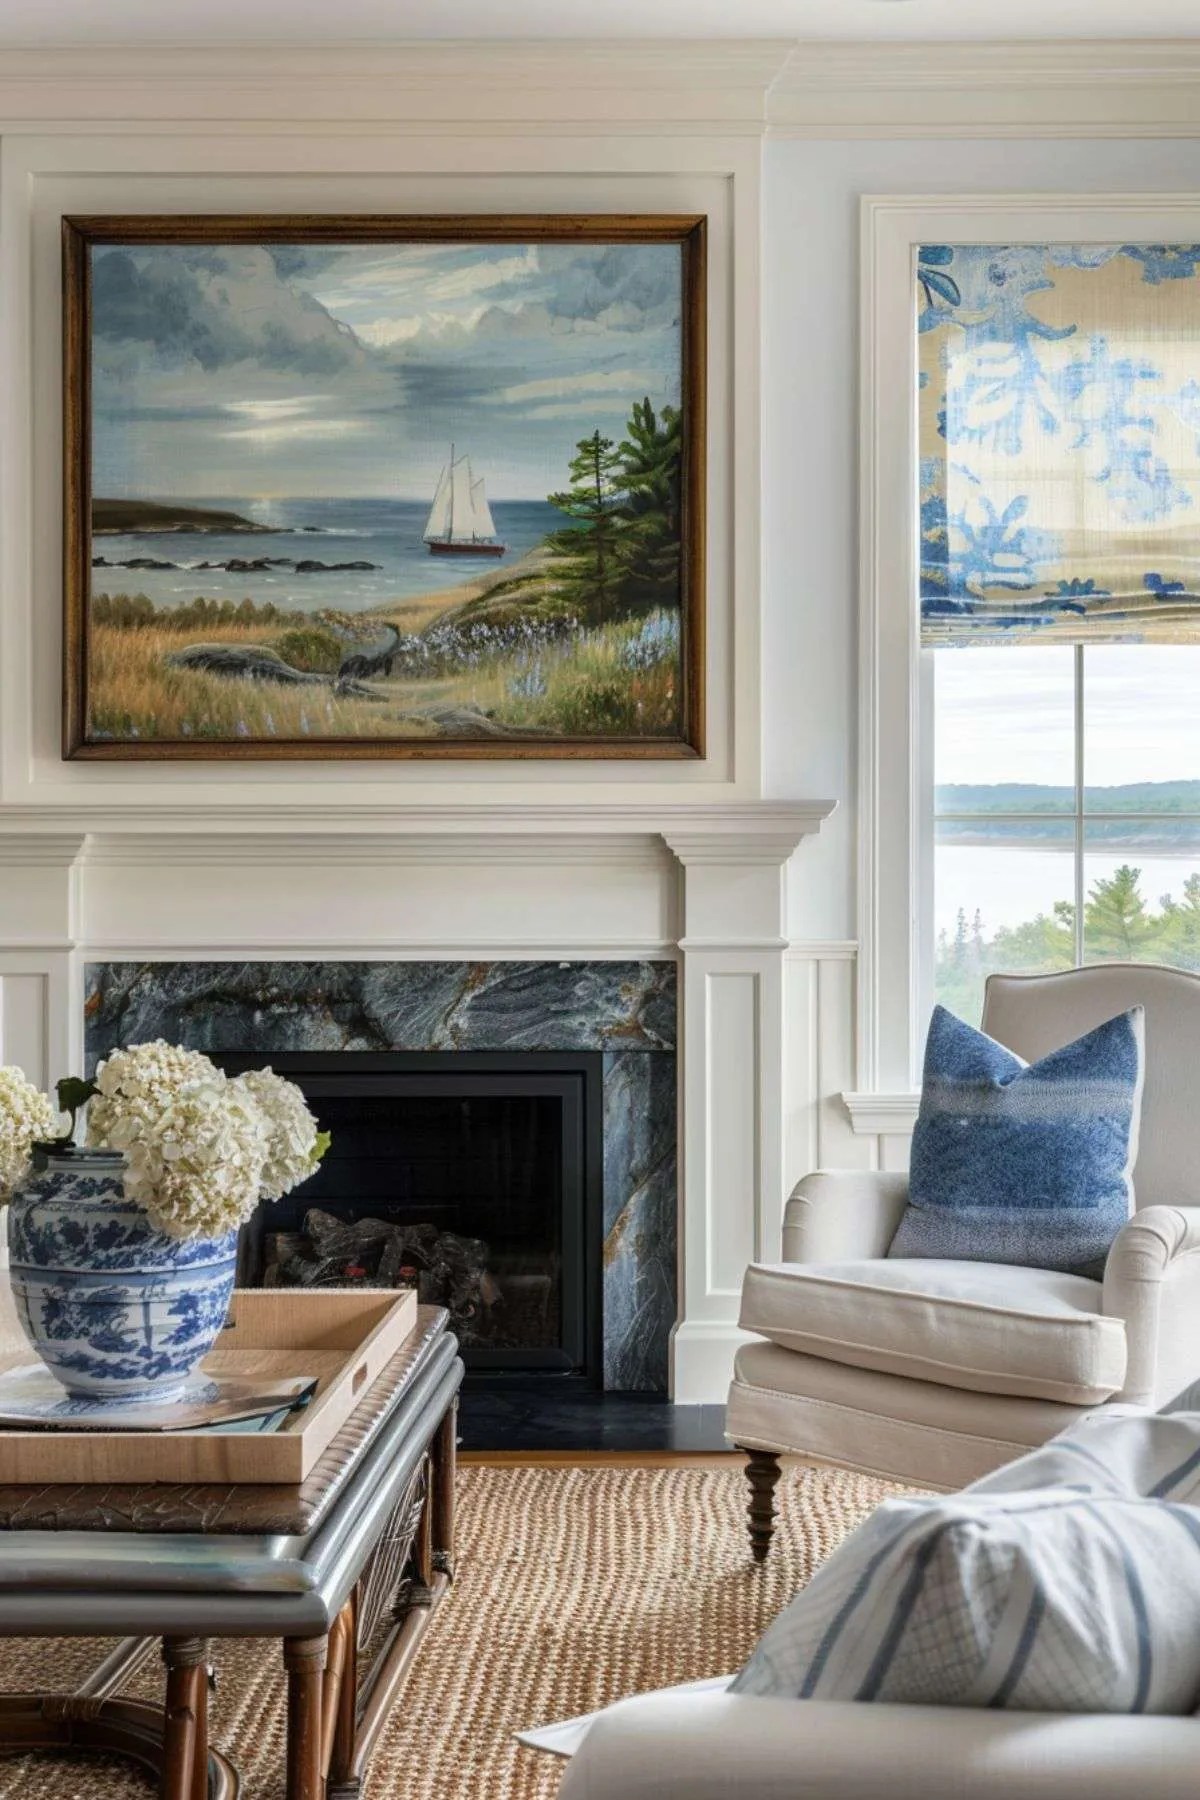 Crafting Upscale Maine Vacation Rentals: 9 Top Interior Design Tips